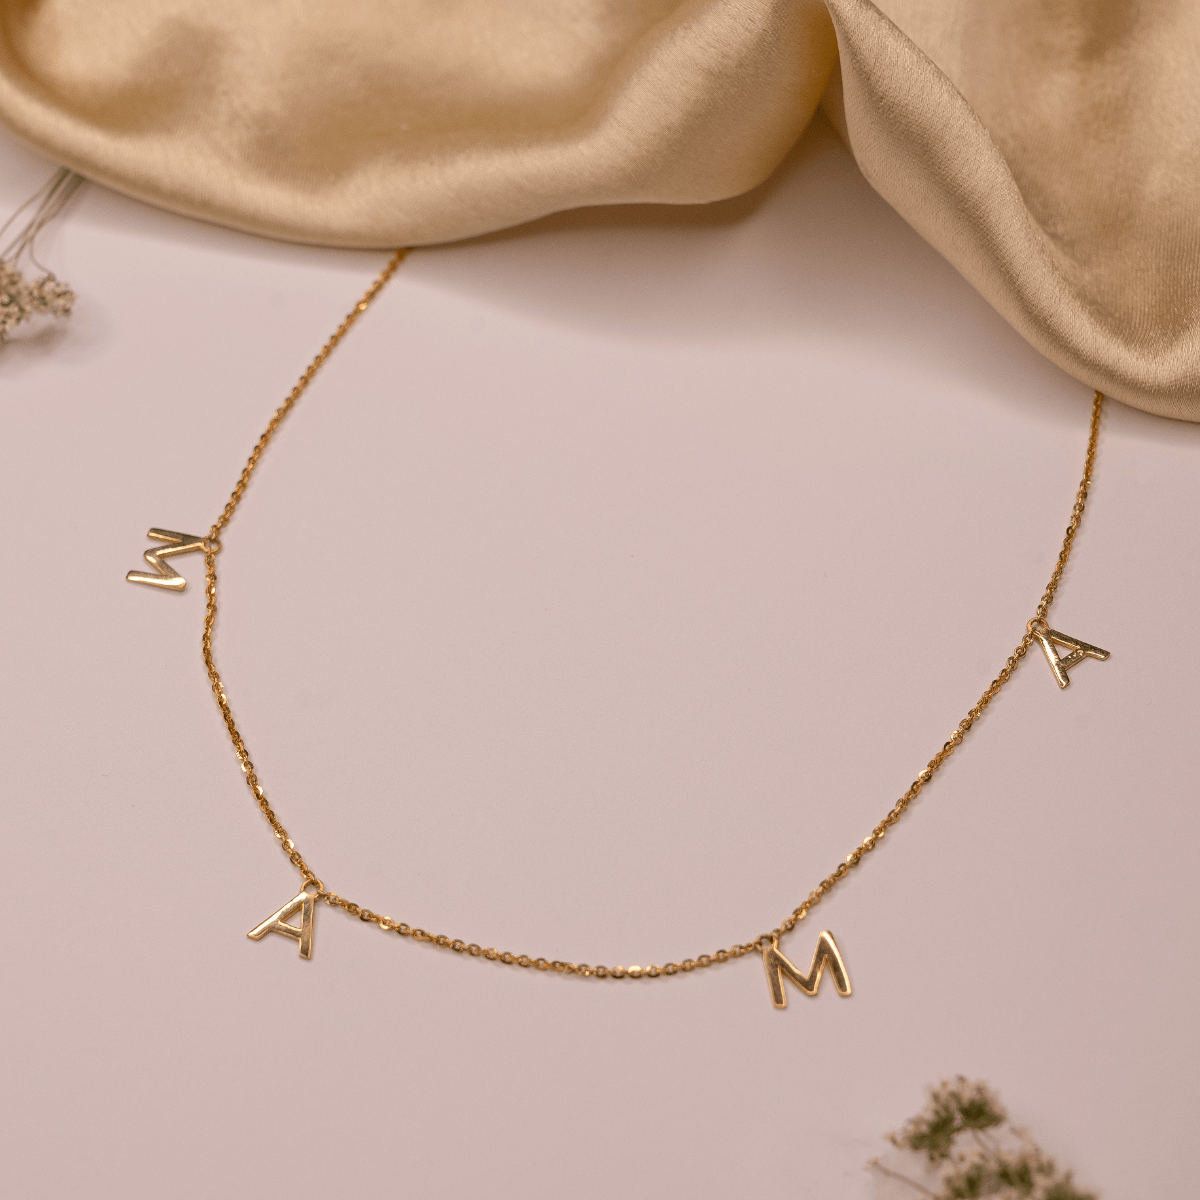 Solid 14K Gold Tiny Heart Necklace add Small Initial Charms – Fine Jewelry  by Anastasia Savenko